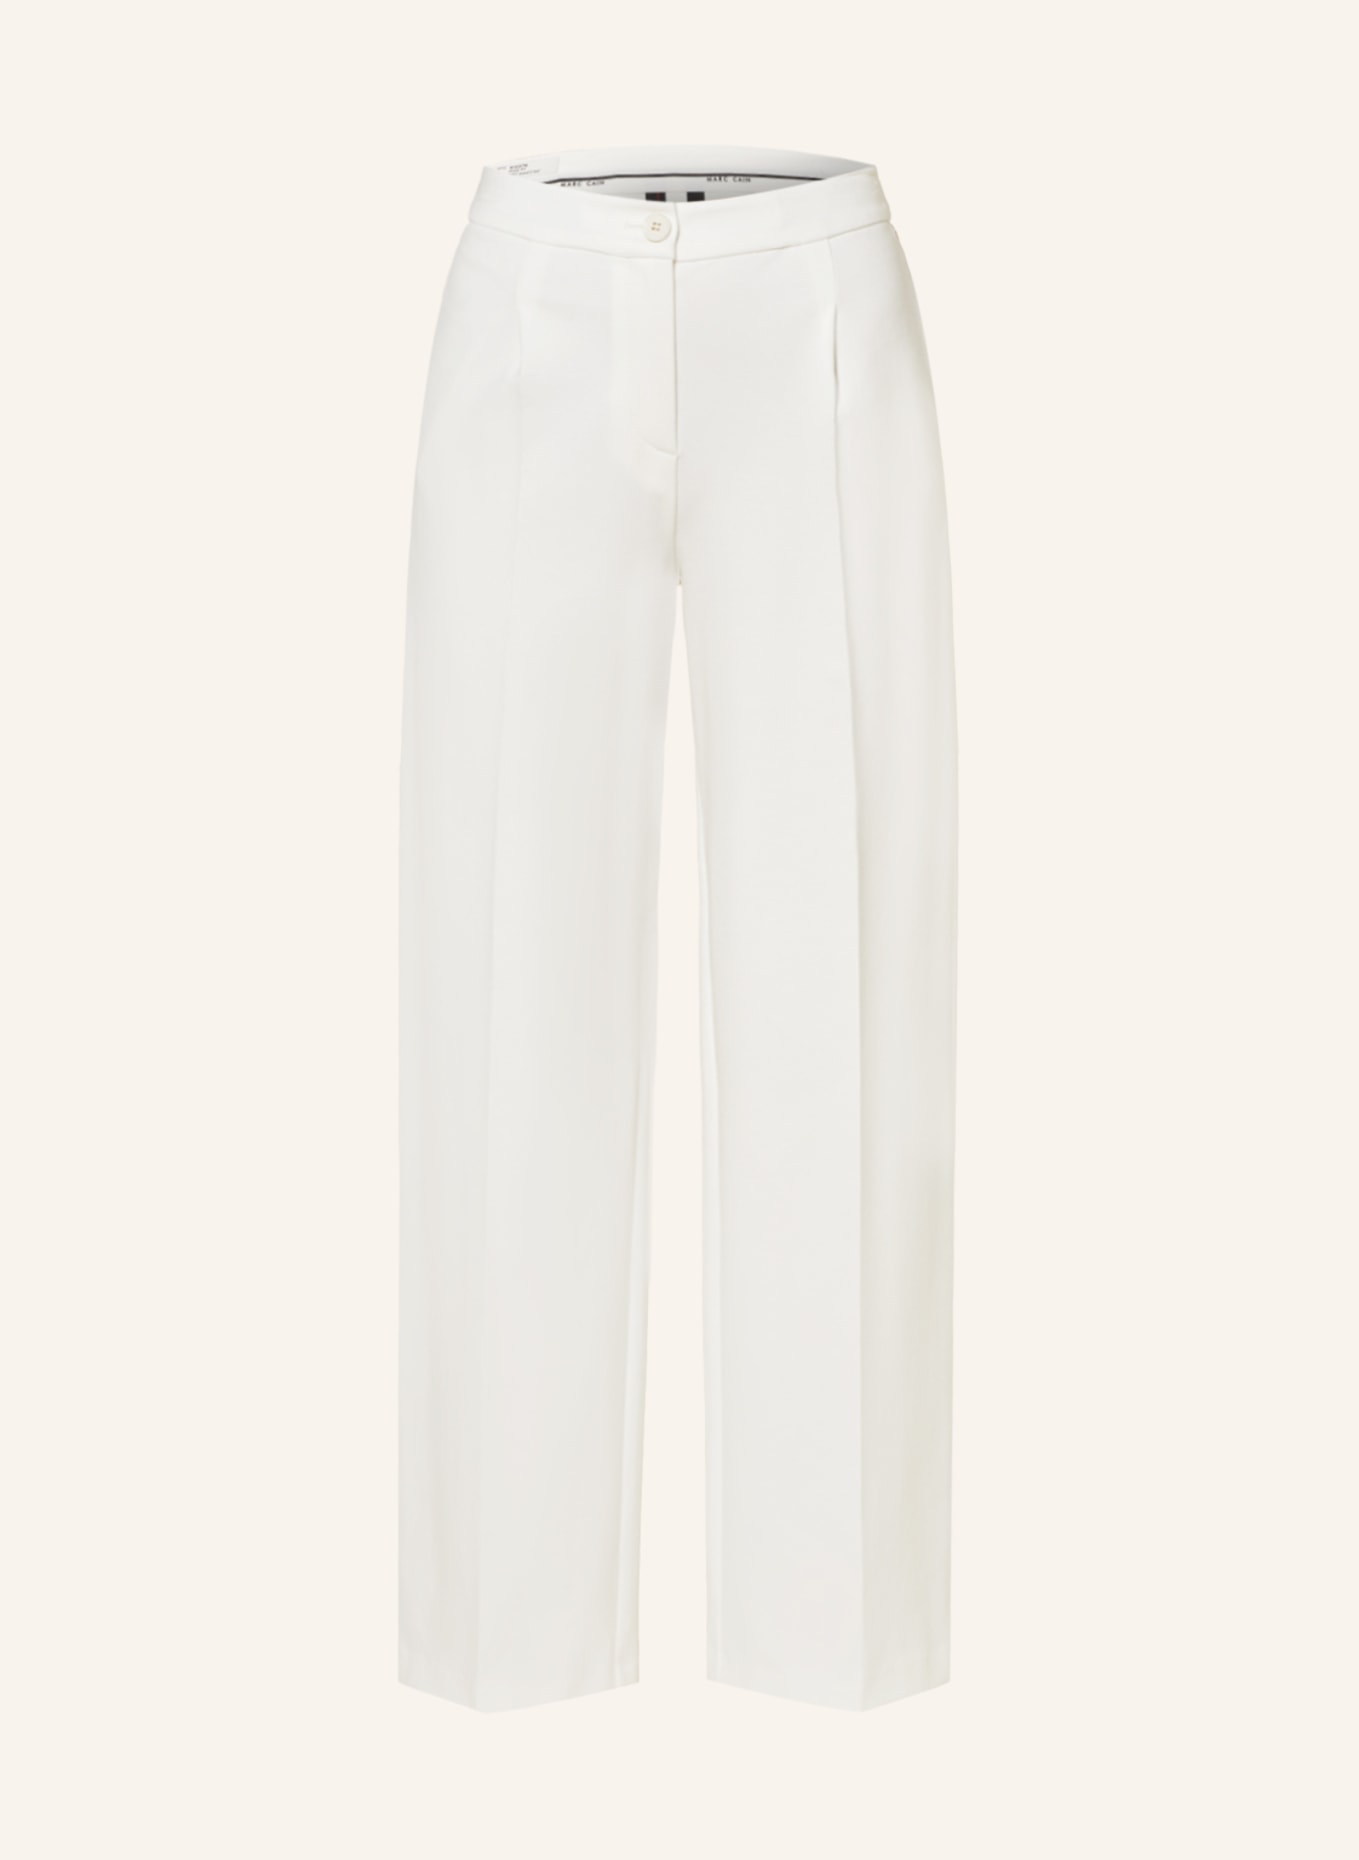 MARC CAIN Jersey pants WICHITA, Color: 110 off (Image 1)